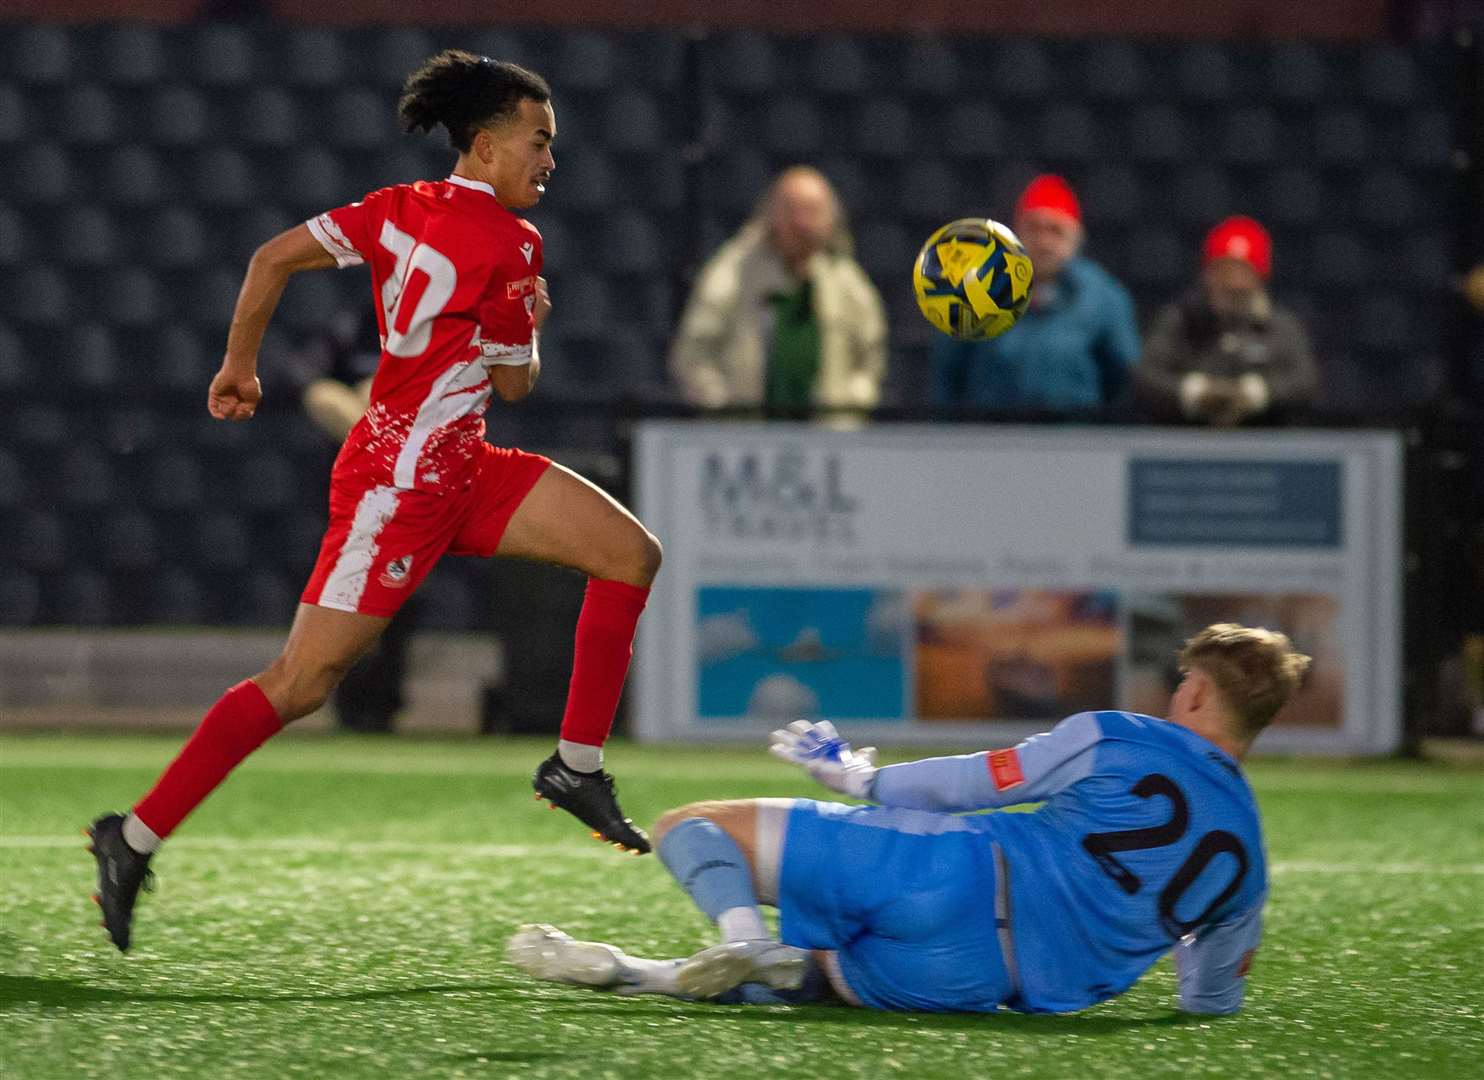 TJ Jadama completes his hat-trick. Picture: Ian Scammell